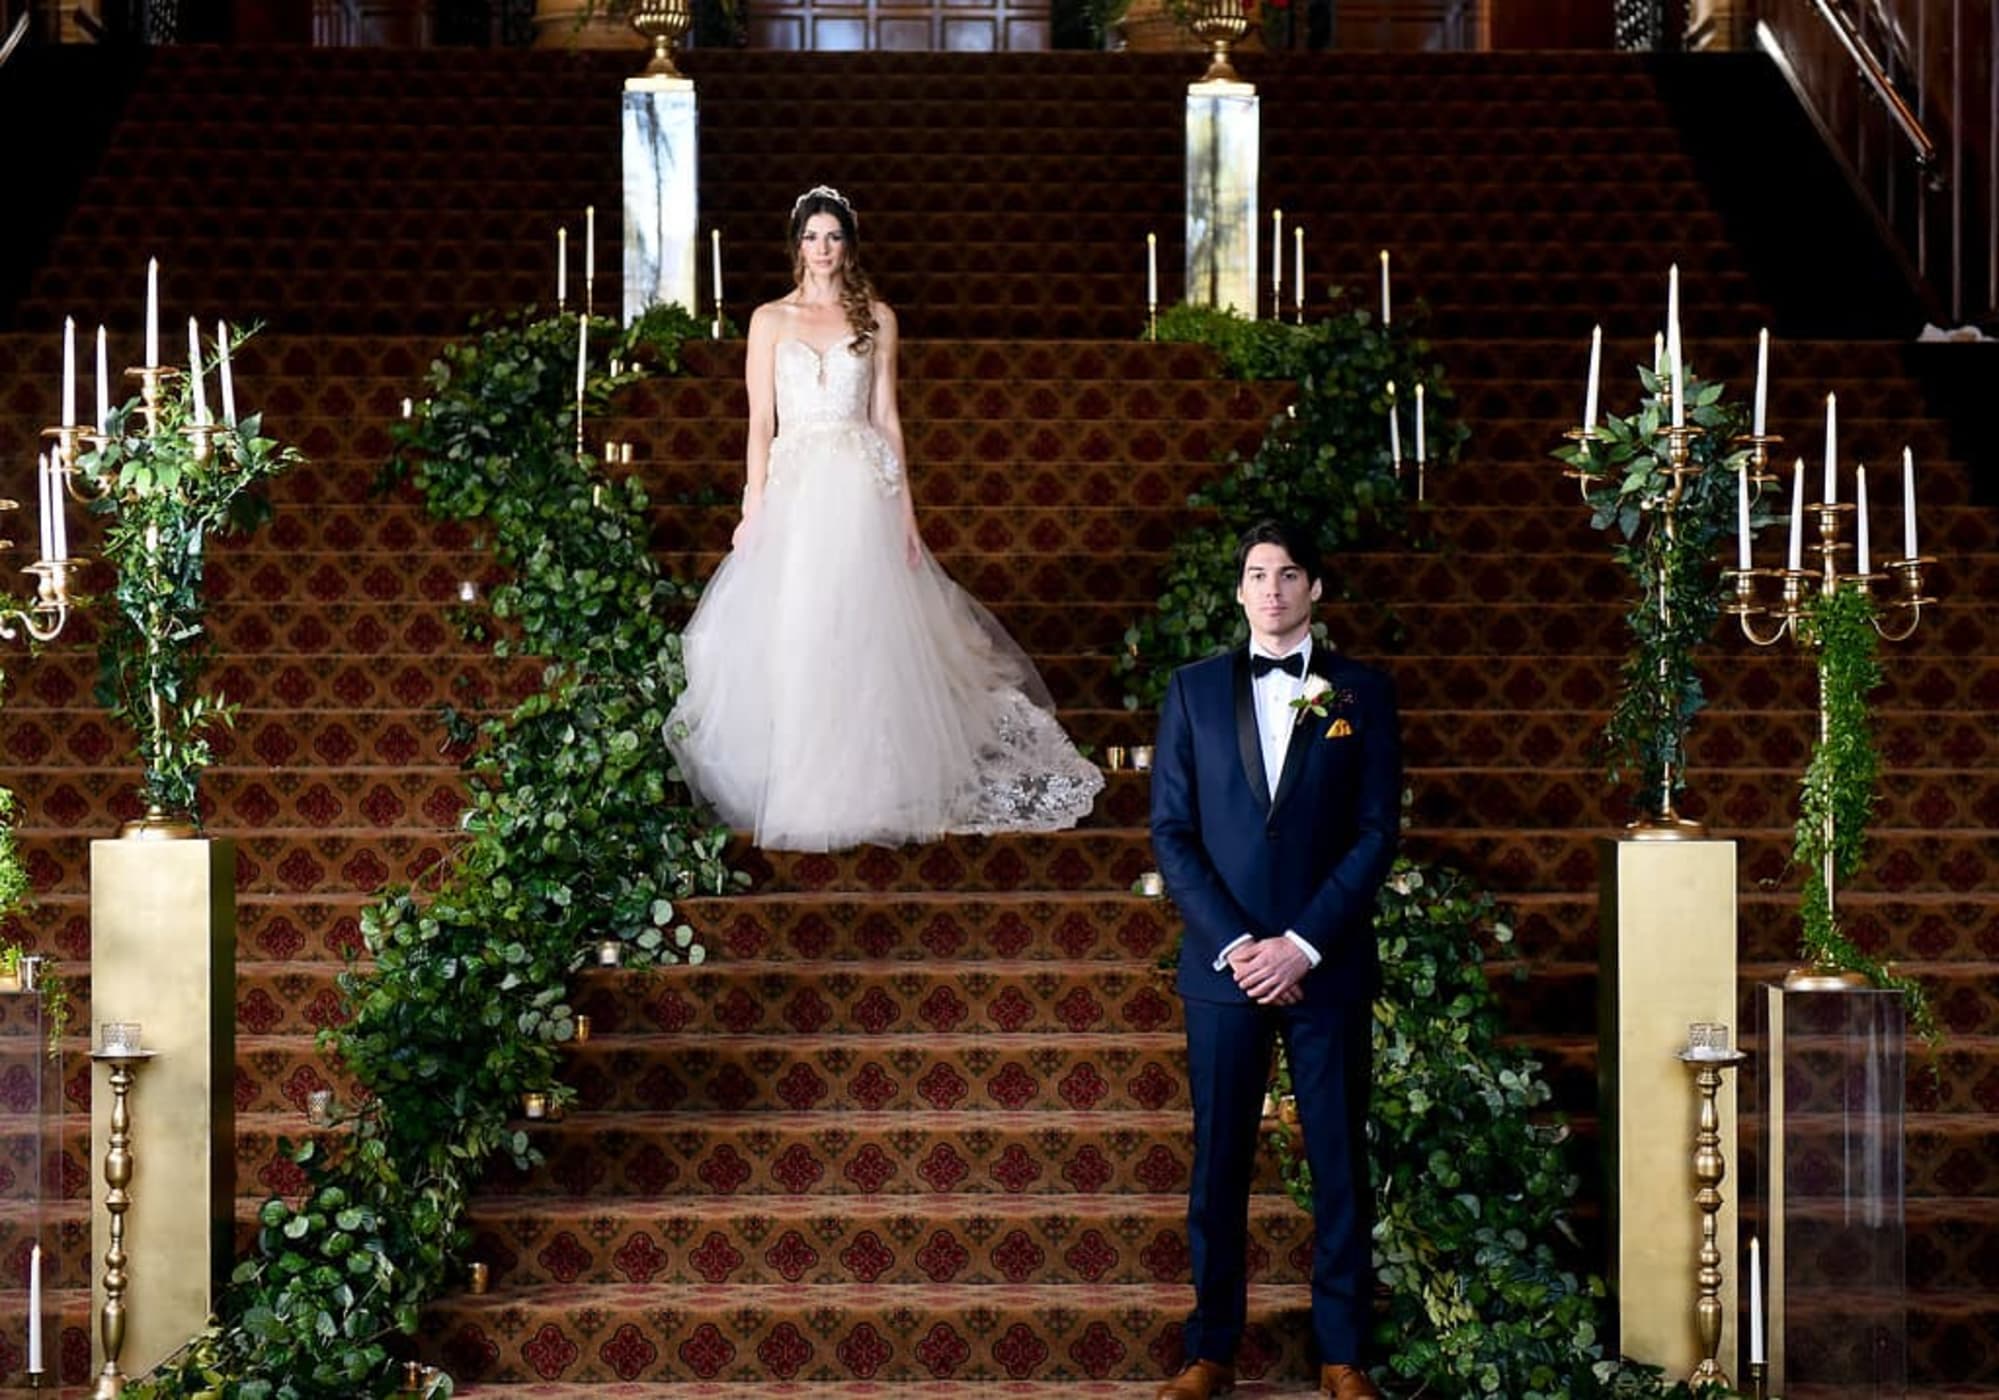 A bride and groom on steps